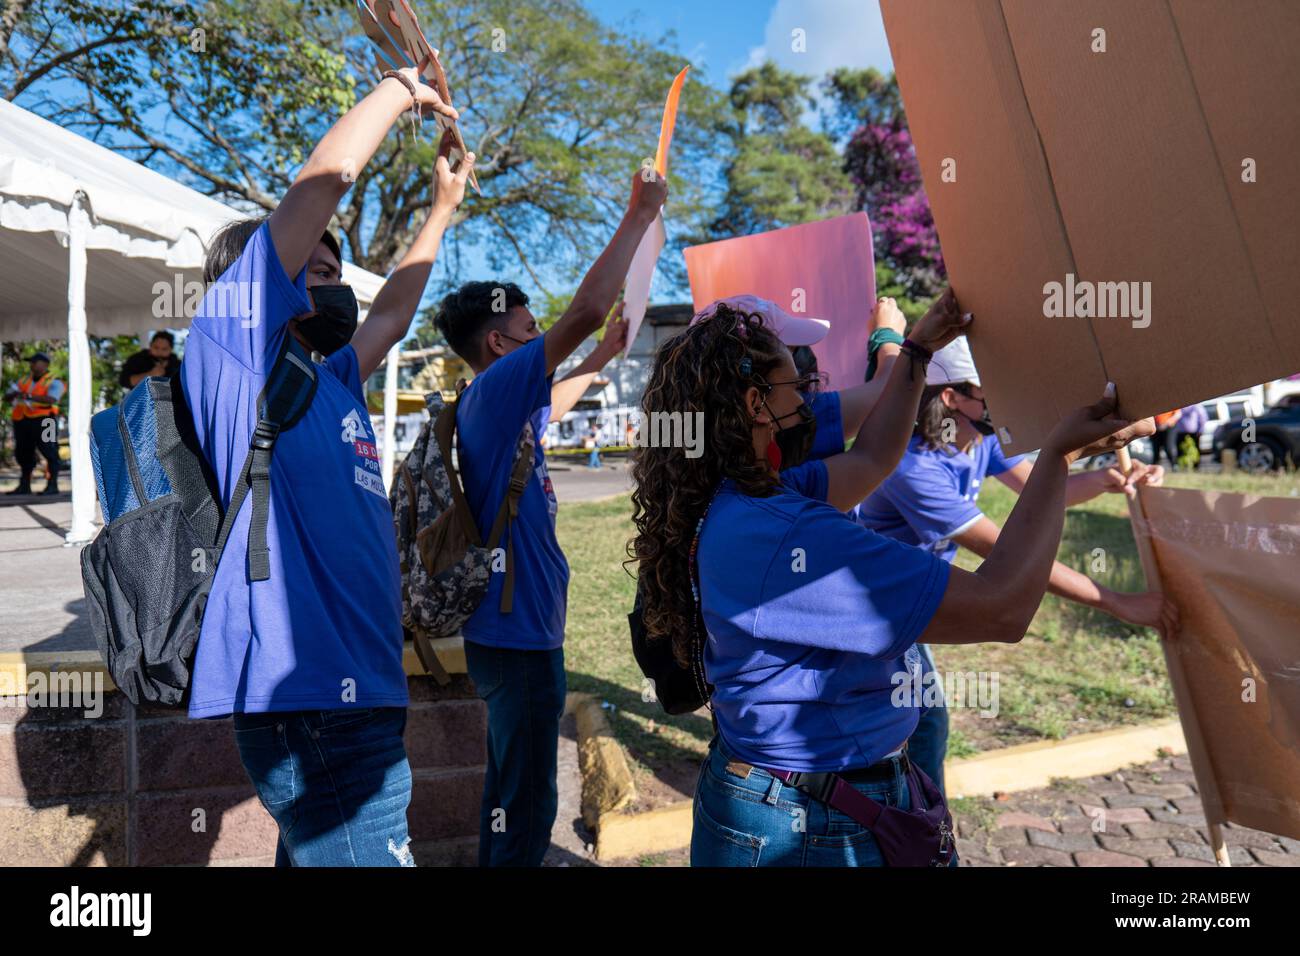 Tegucigalpa, Francisco Morazan, Honduras - December 11, 2022: Young Brown Adults Hold Cardboard Signs at Protest for the International Day for the Eli Stock Photo